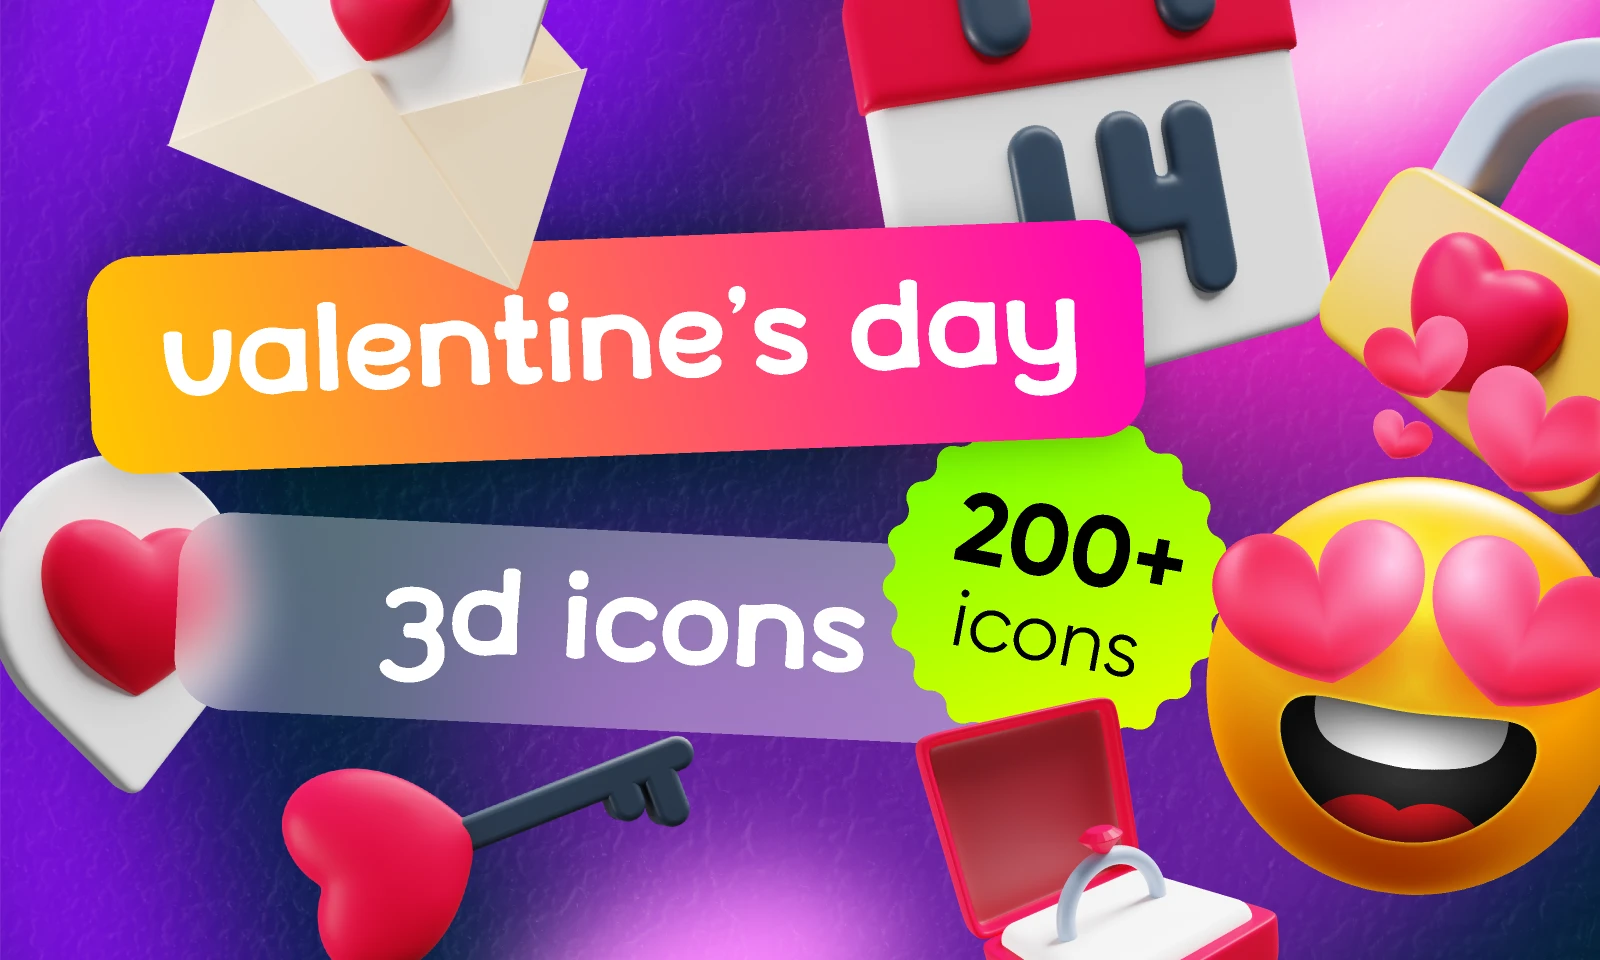 Valentine's day 3D icons FREE for Figma and Adobe XD